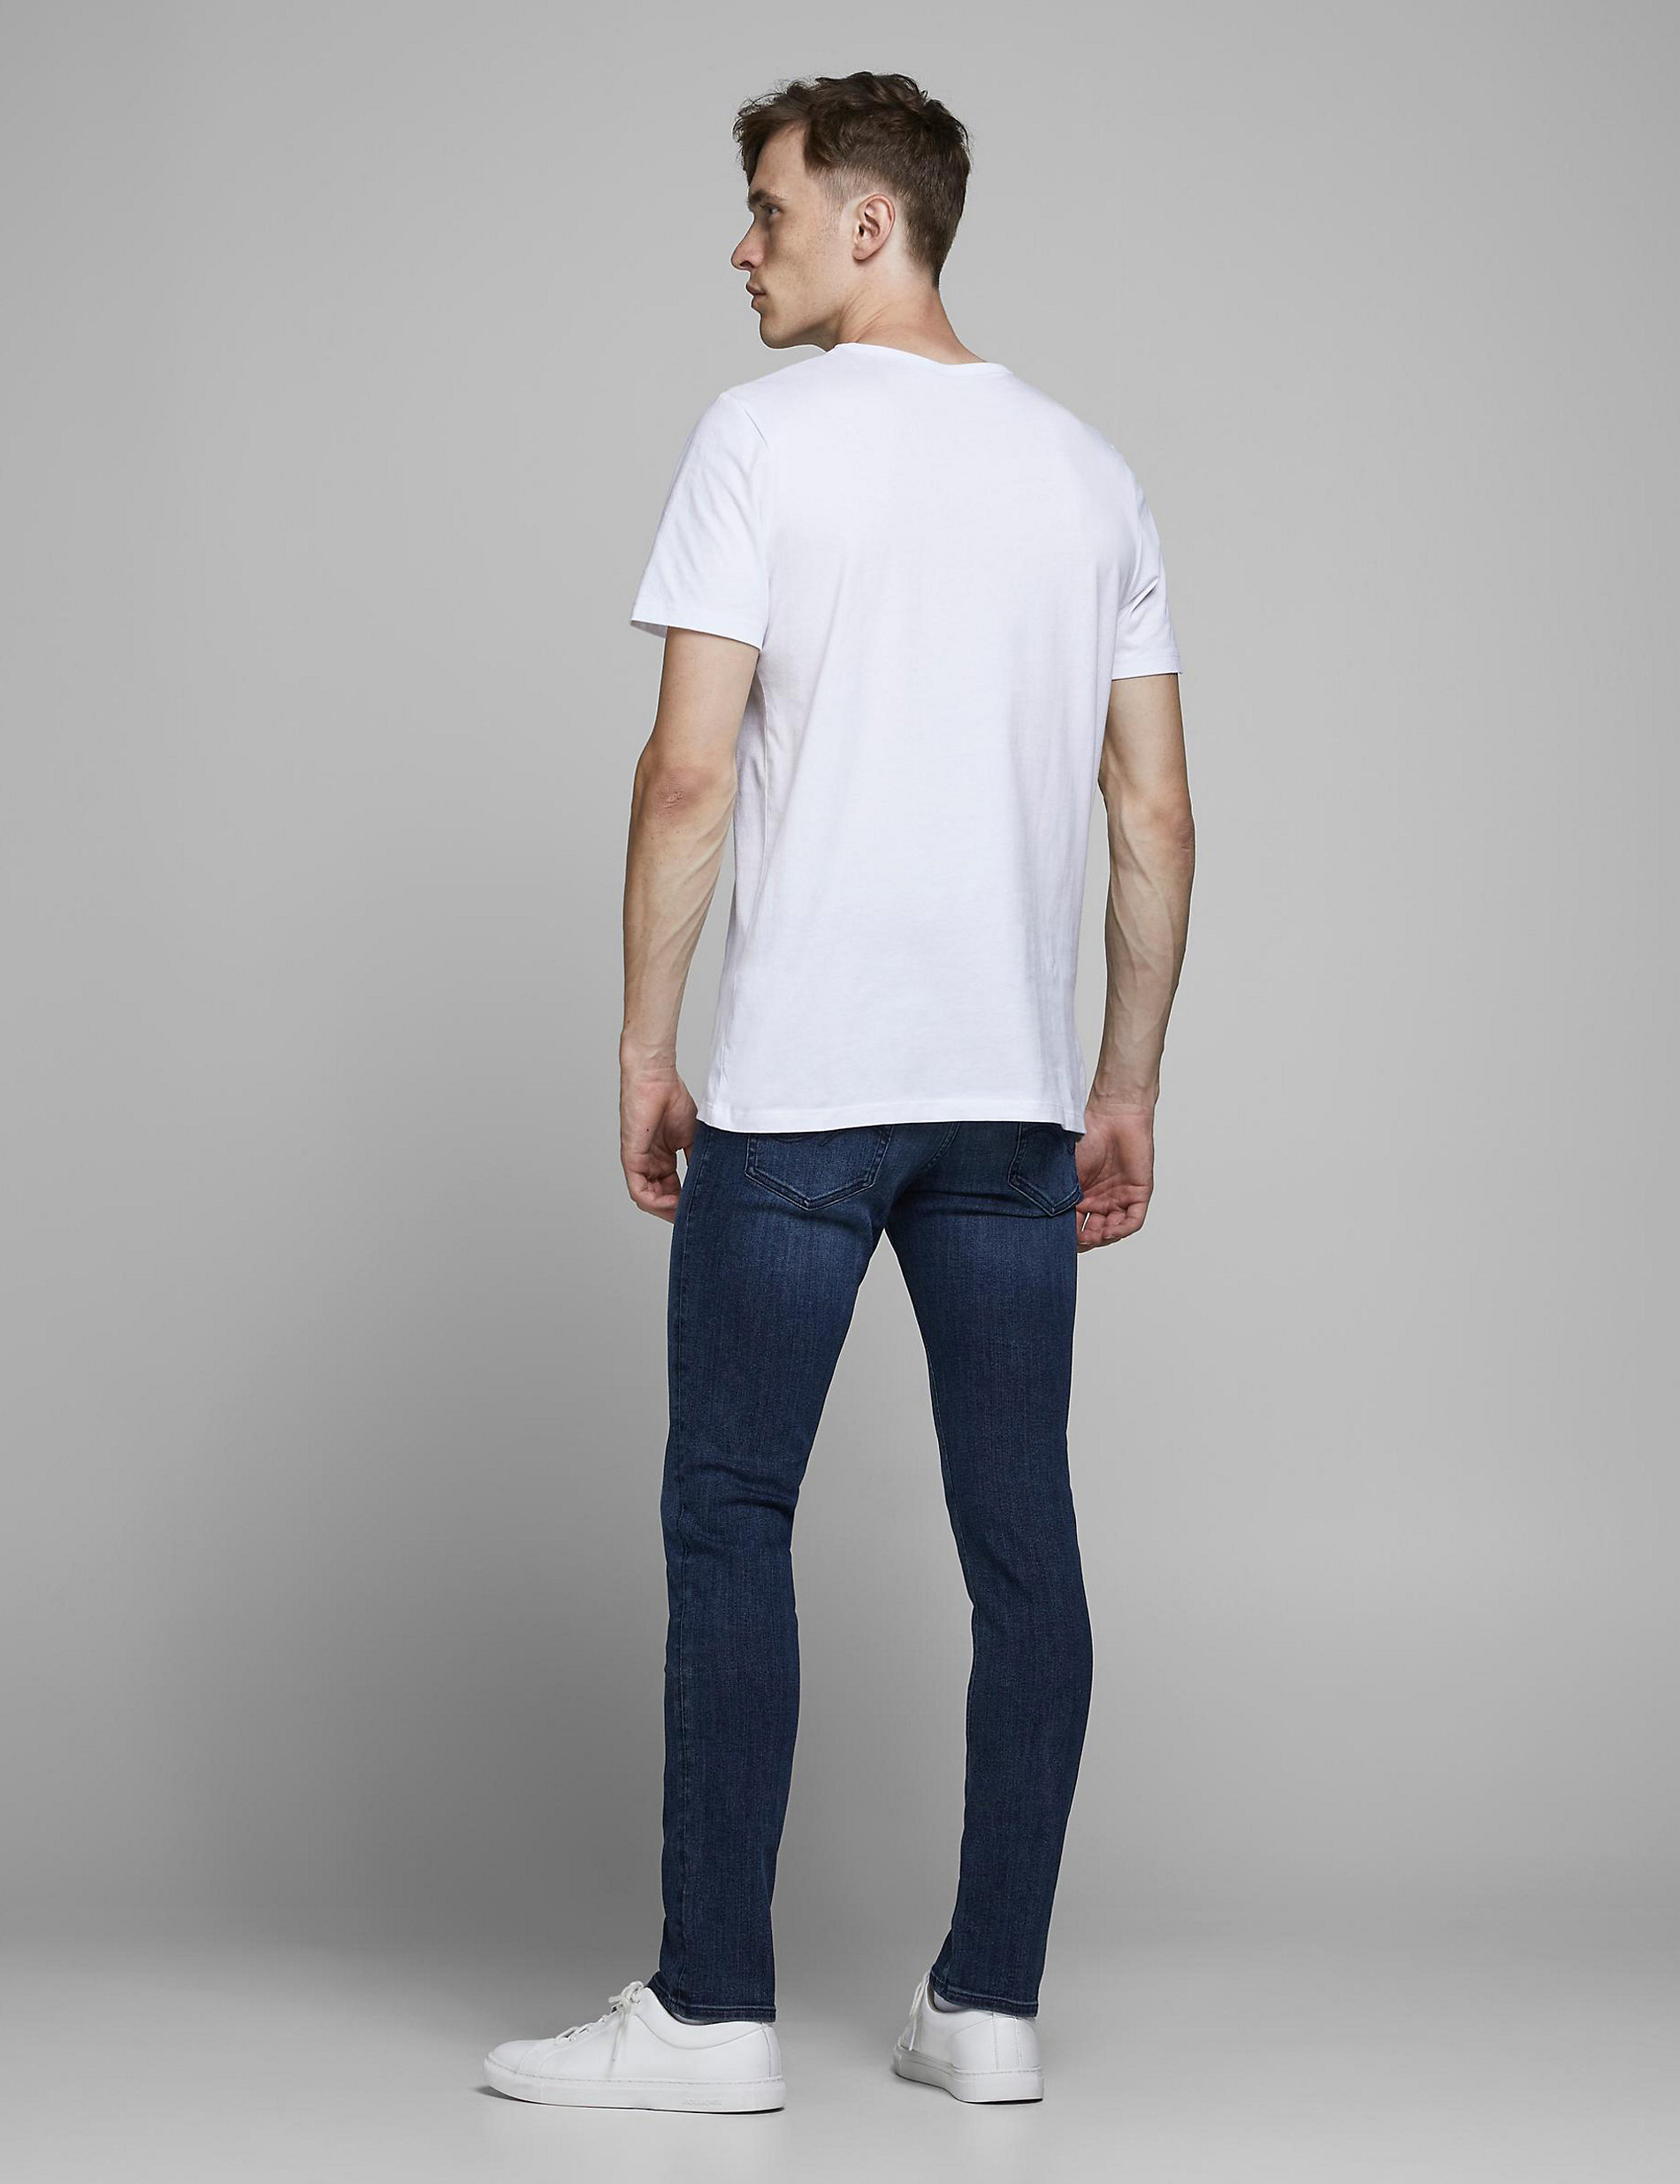 Jean extensible coupe slim